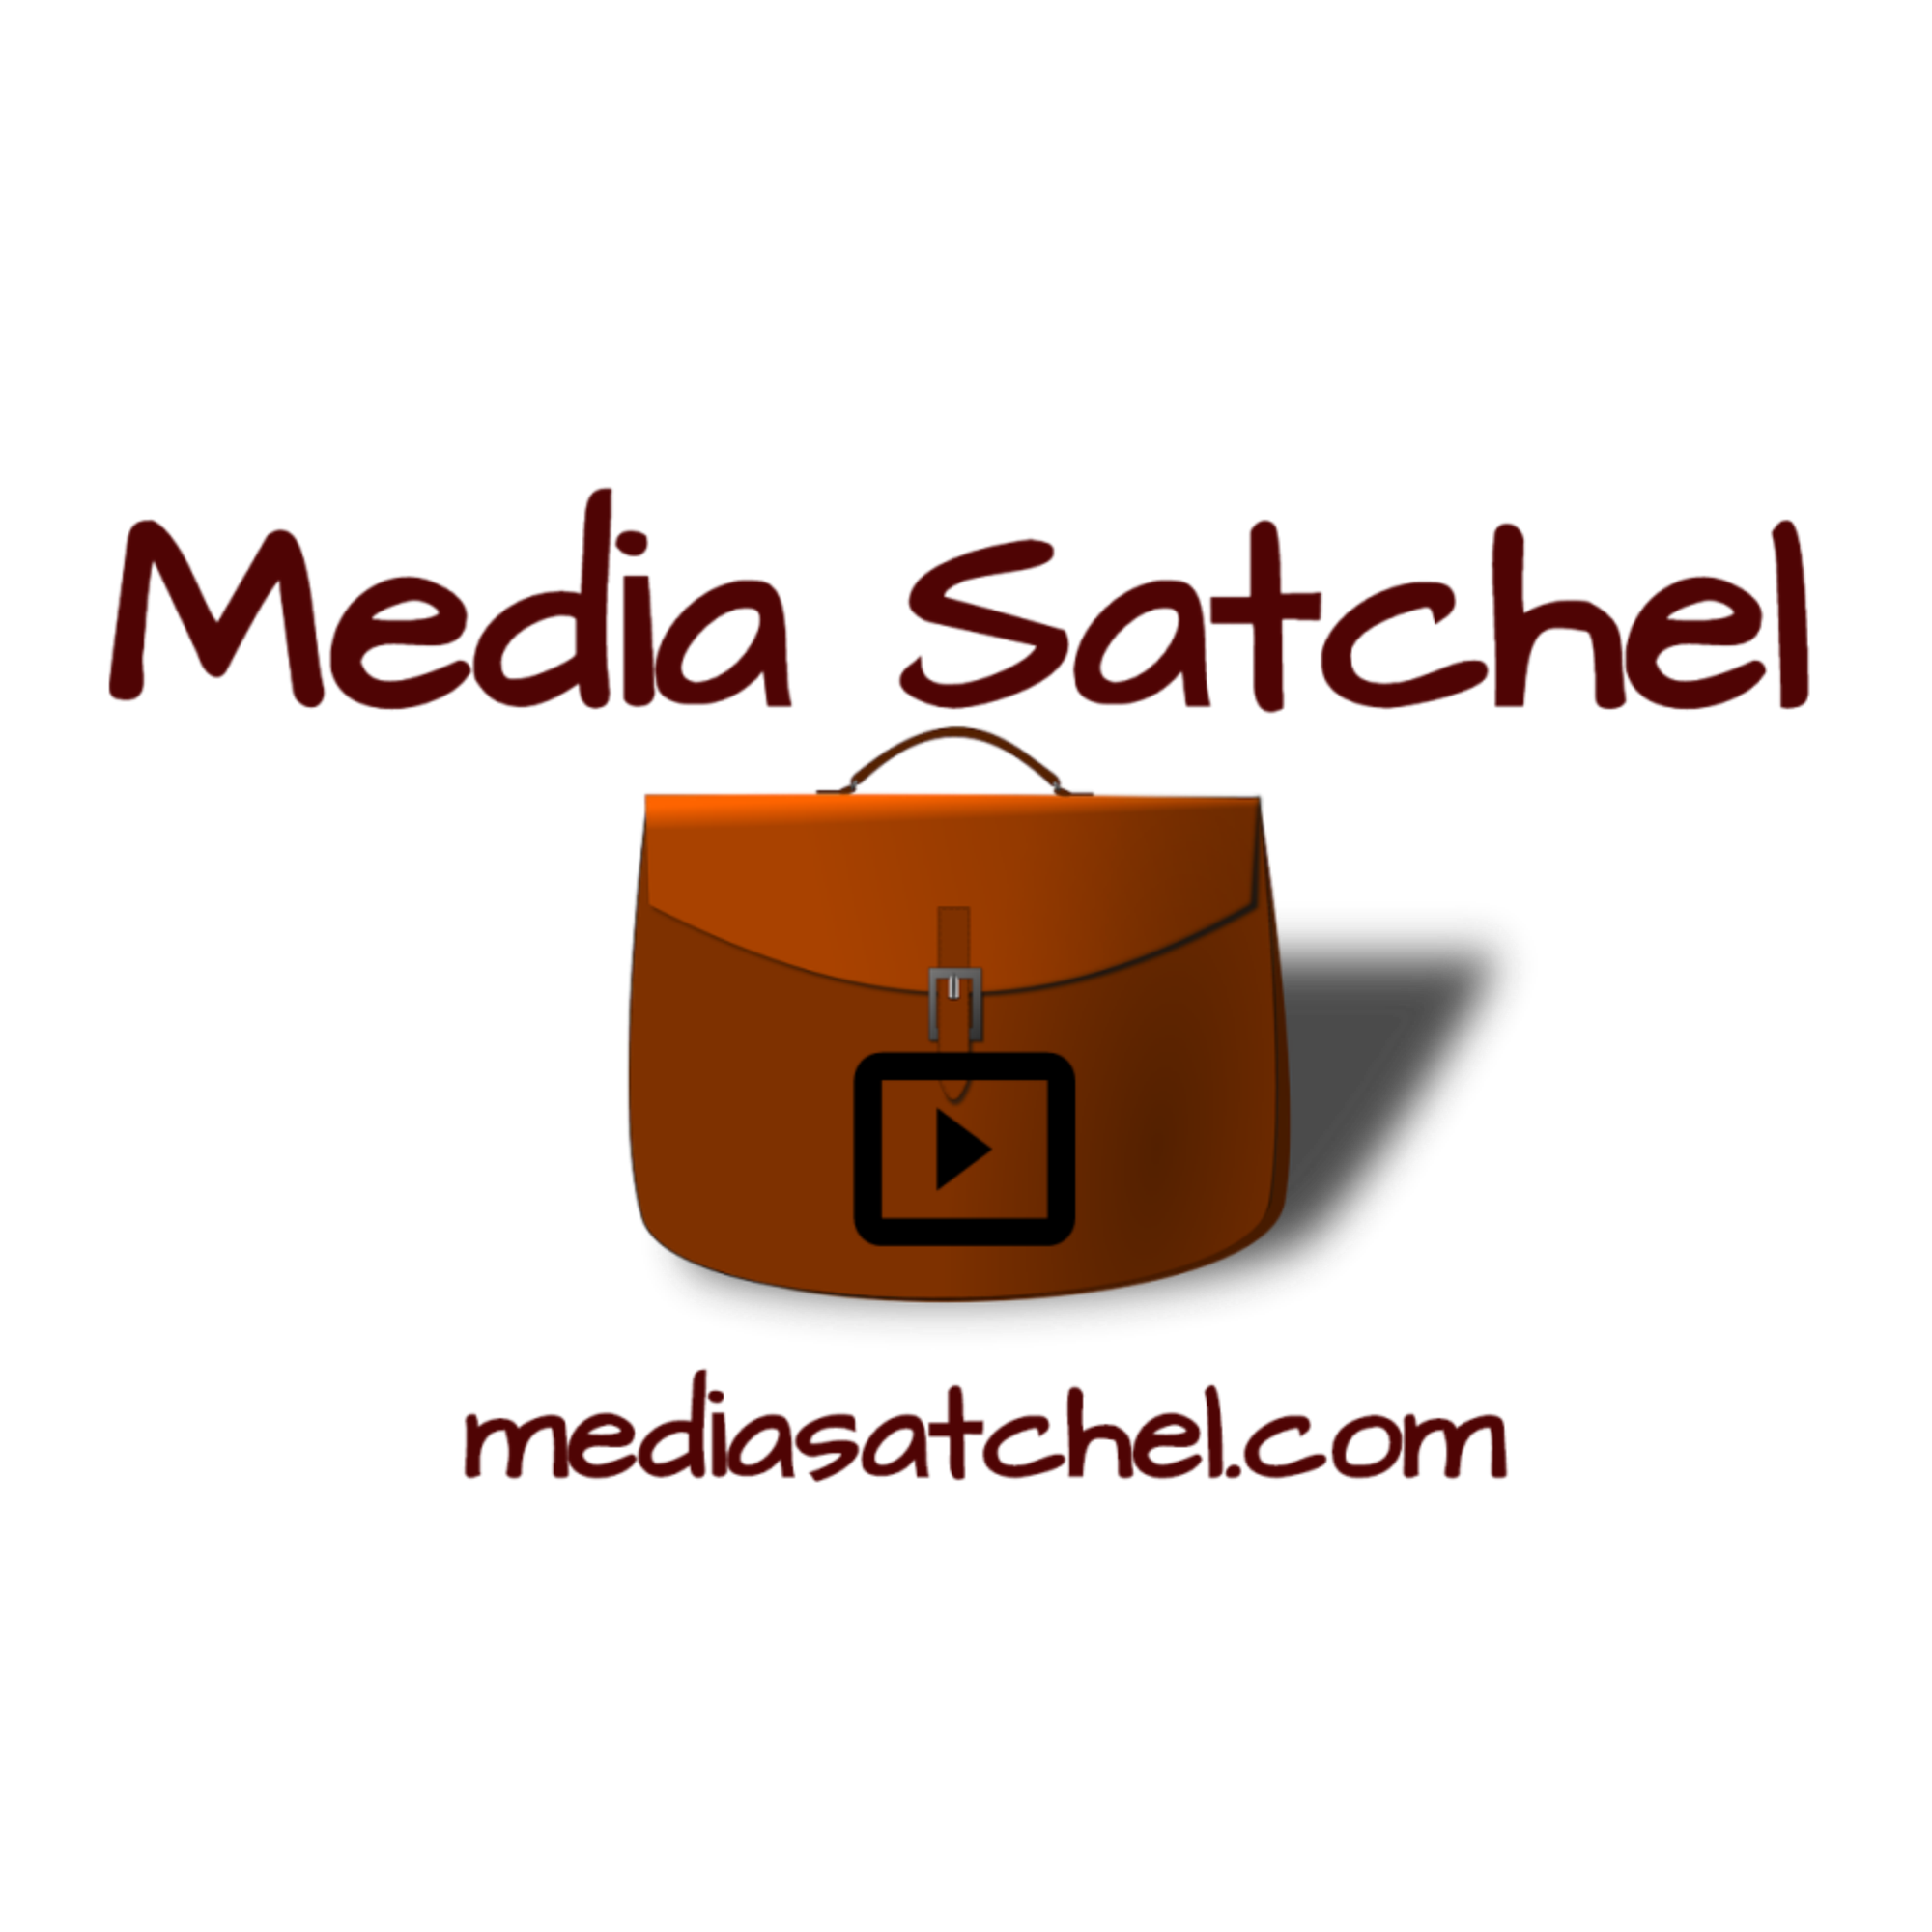 The Media Satchel Store site is coming soon